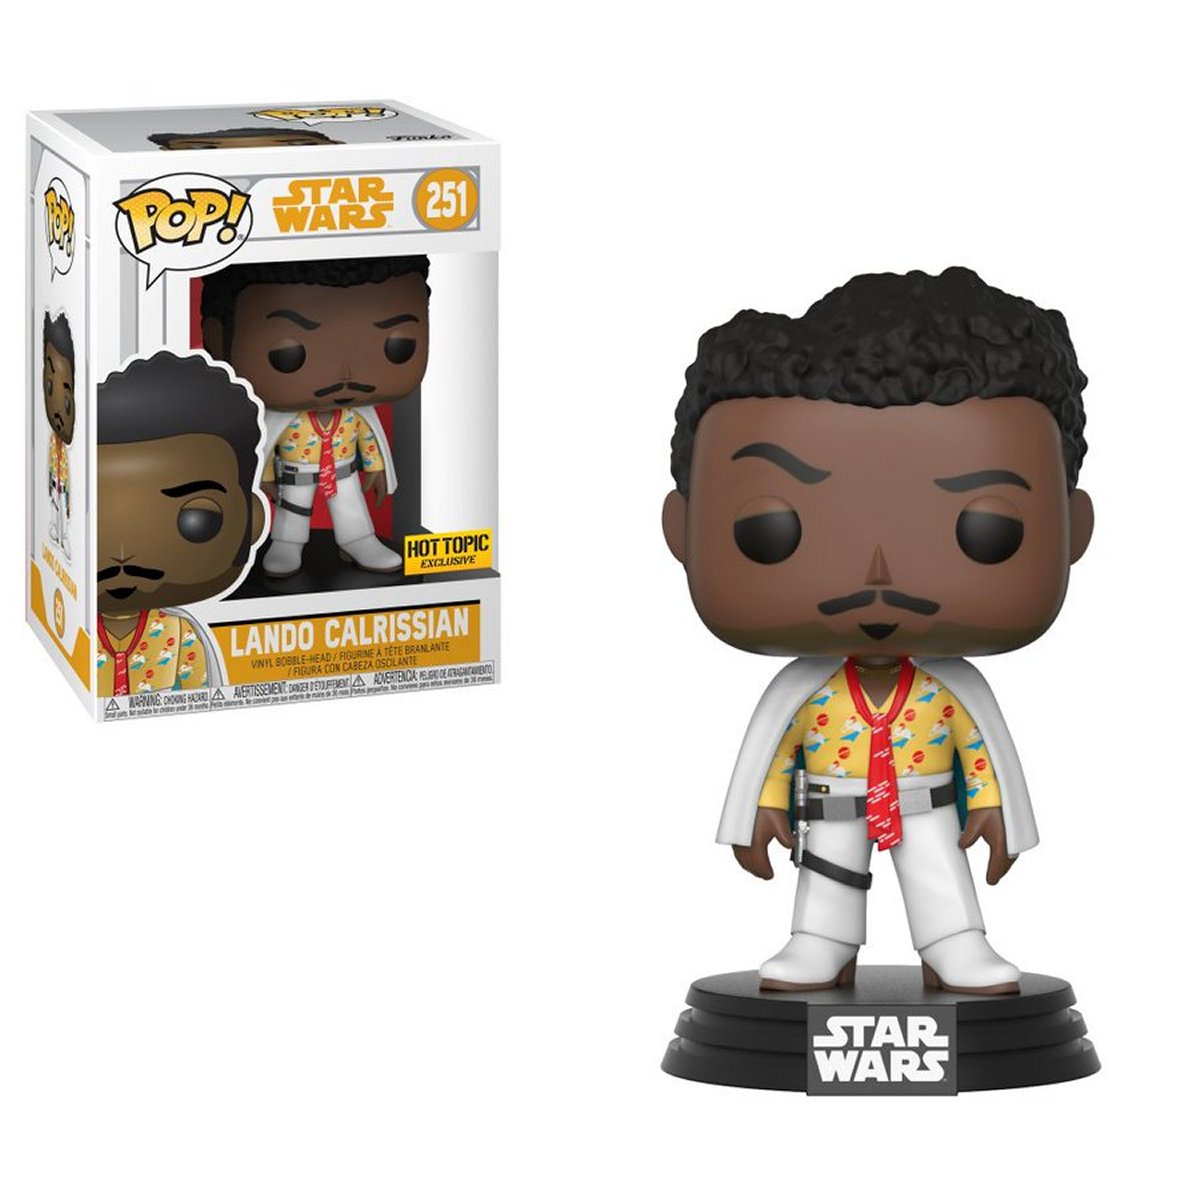 Lando Calrissian Funko Pop, displayed in box and out of box